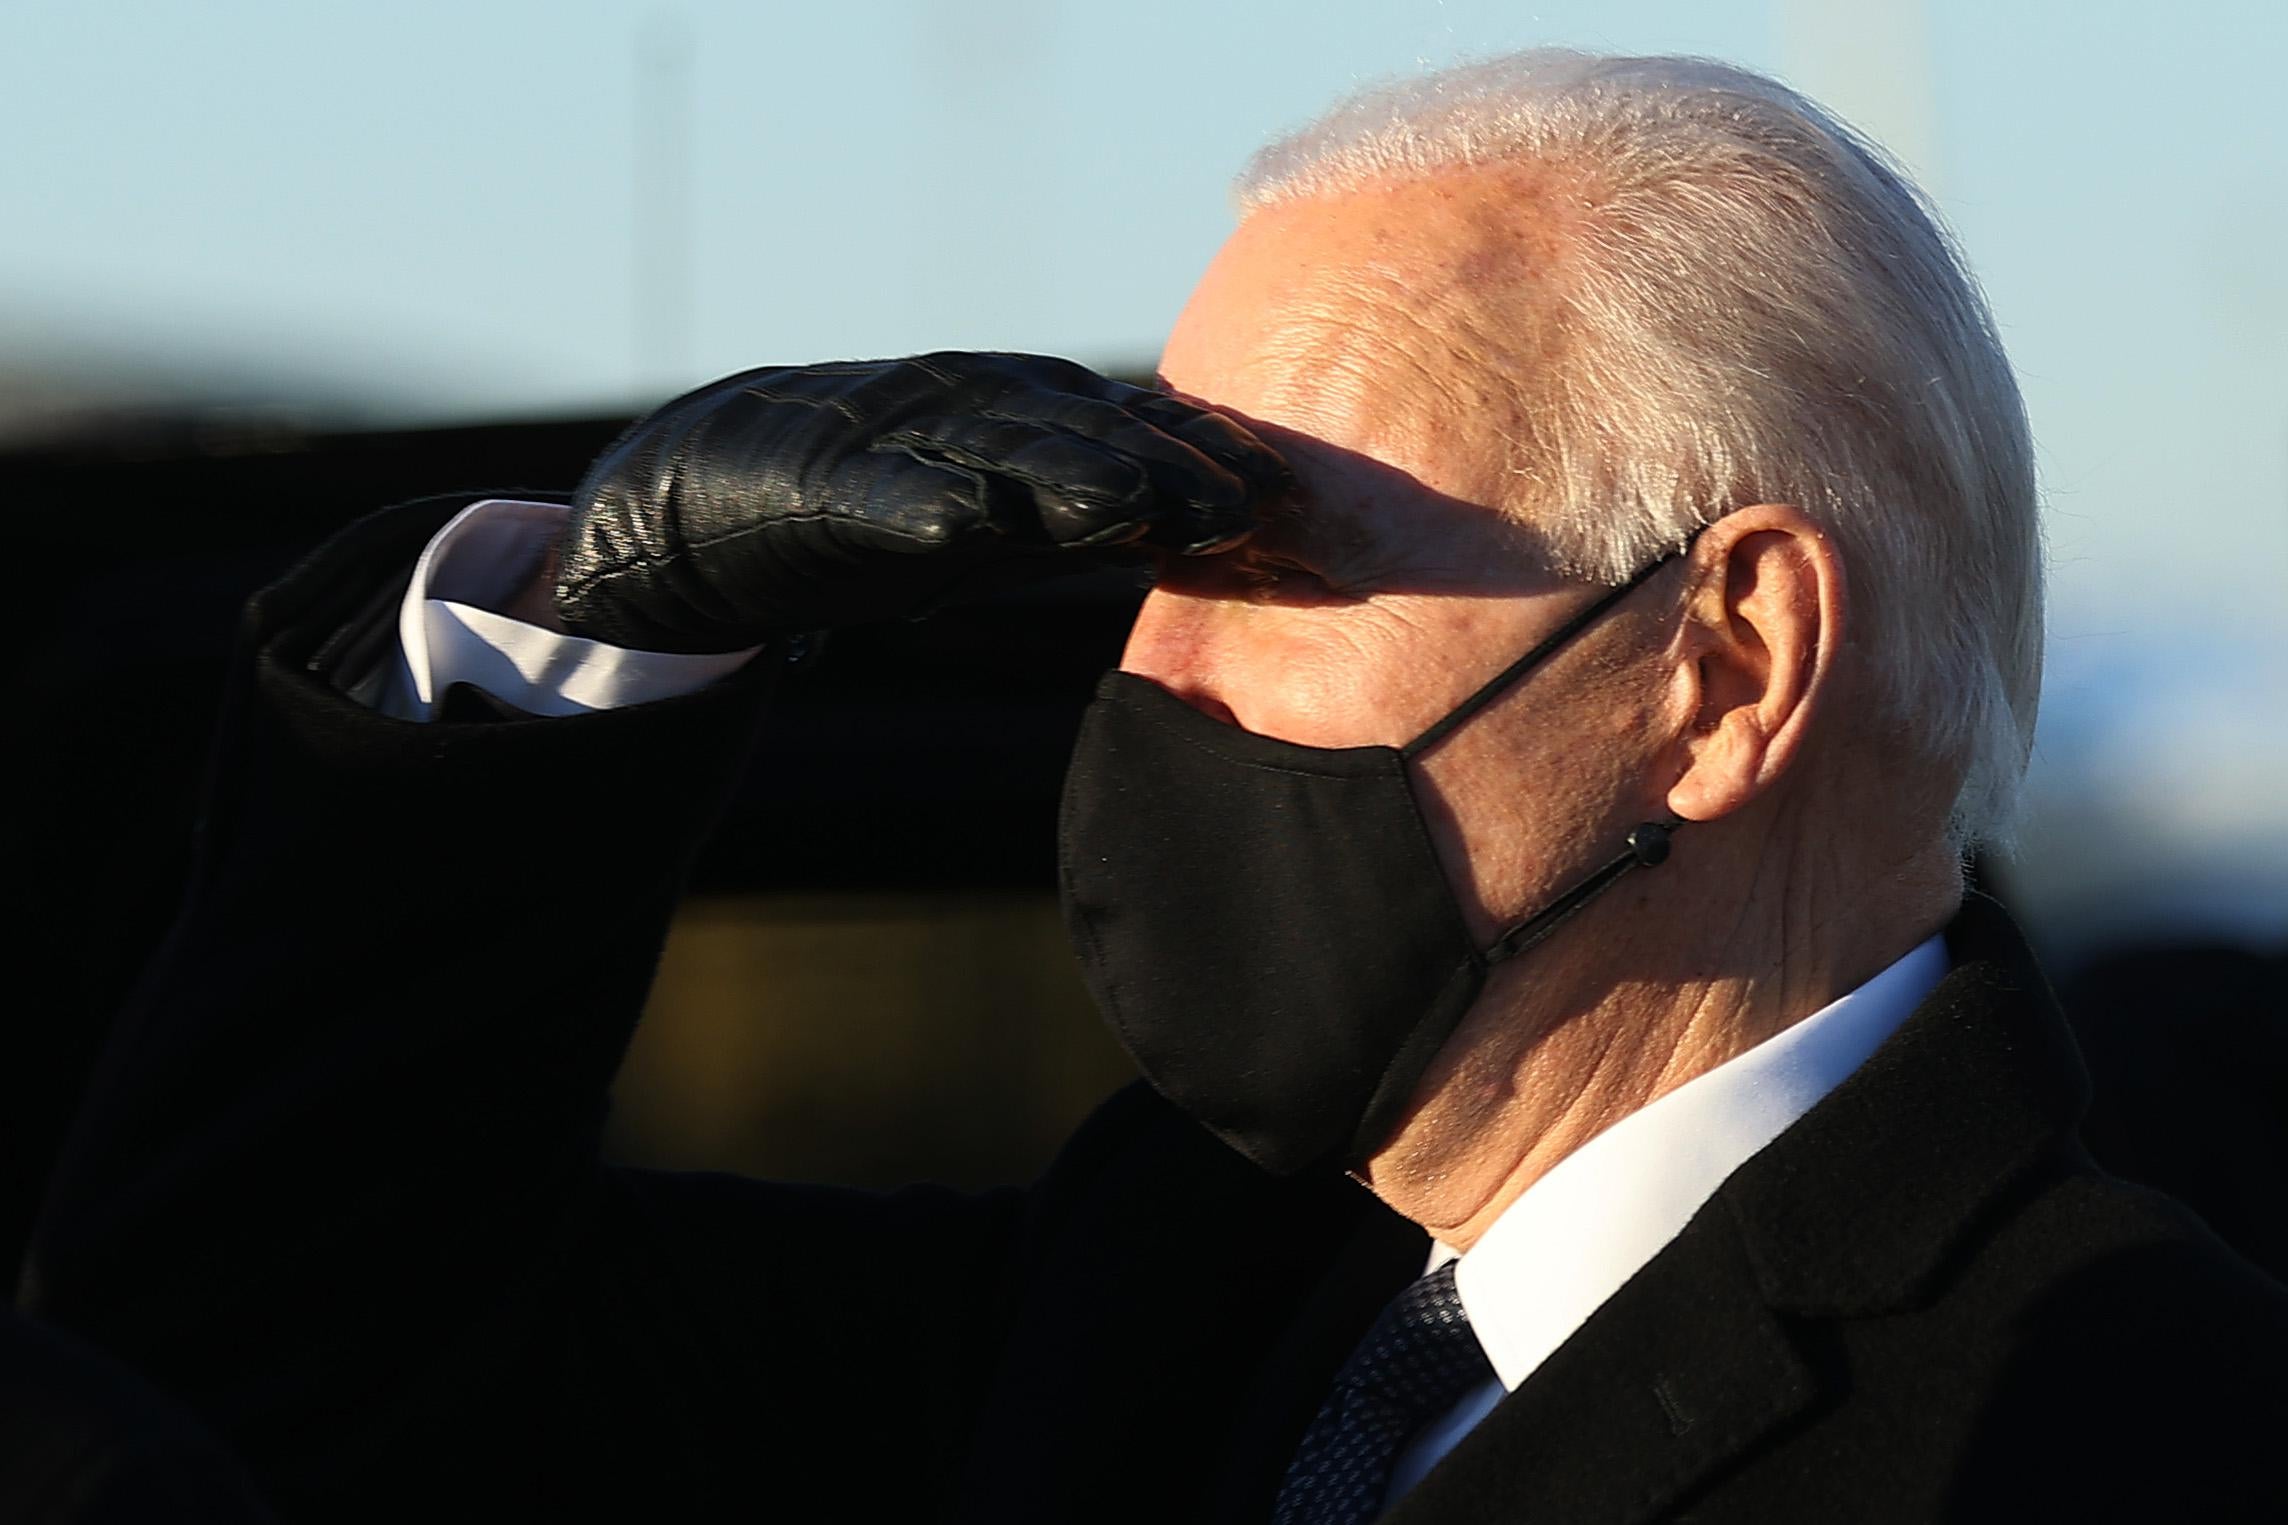 Biden, wearing a black mask, salutes with a gloved hand